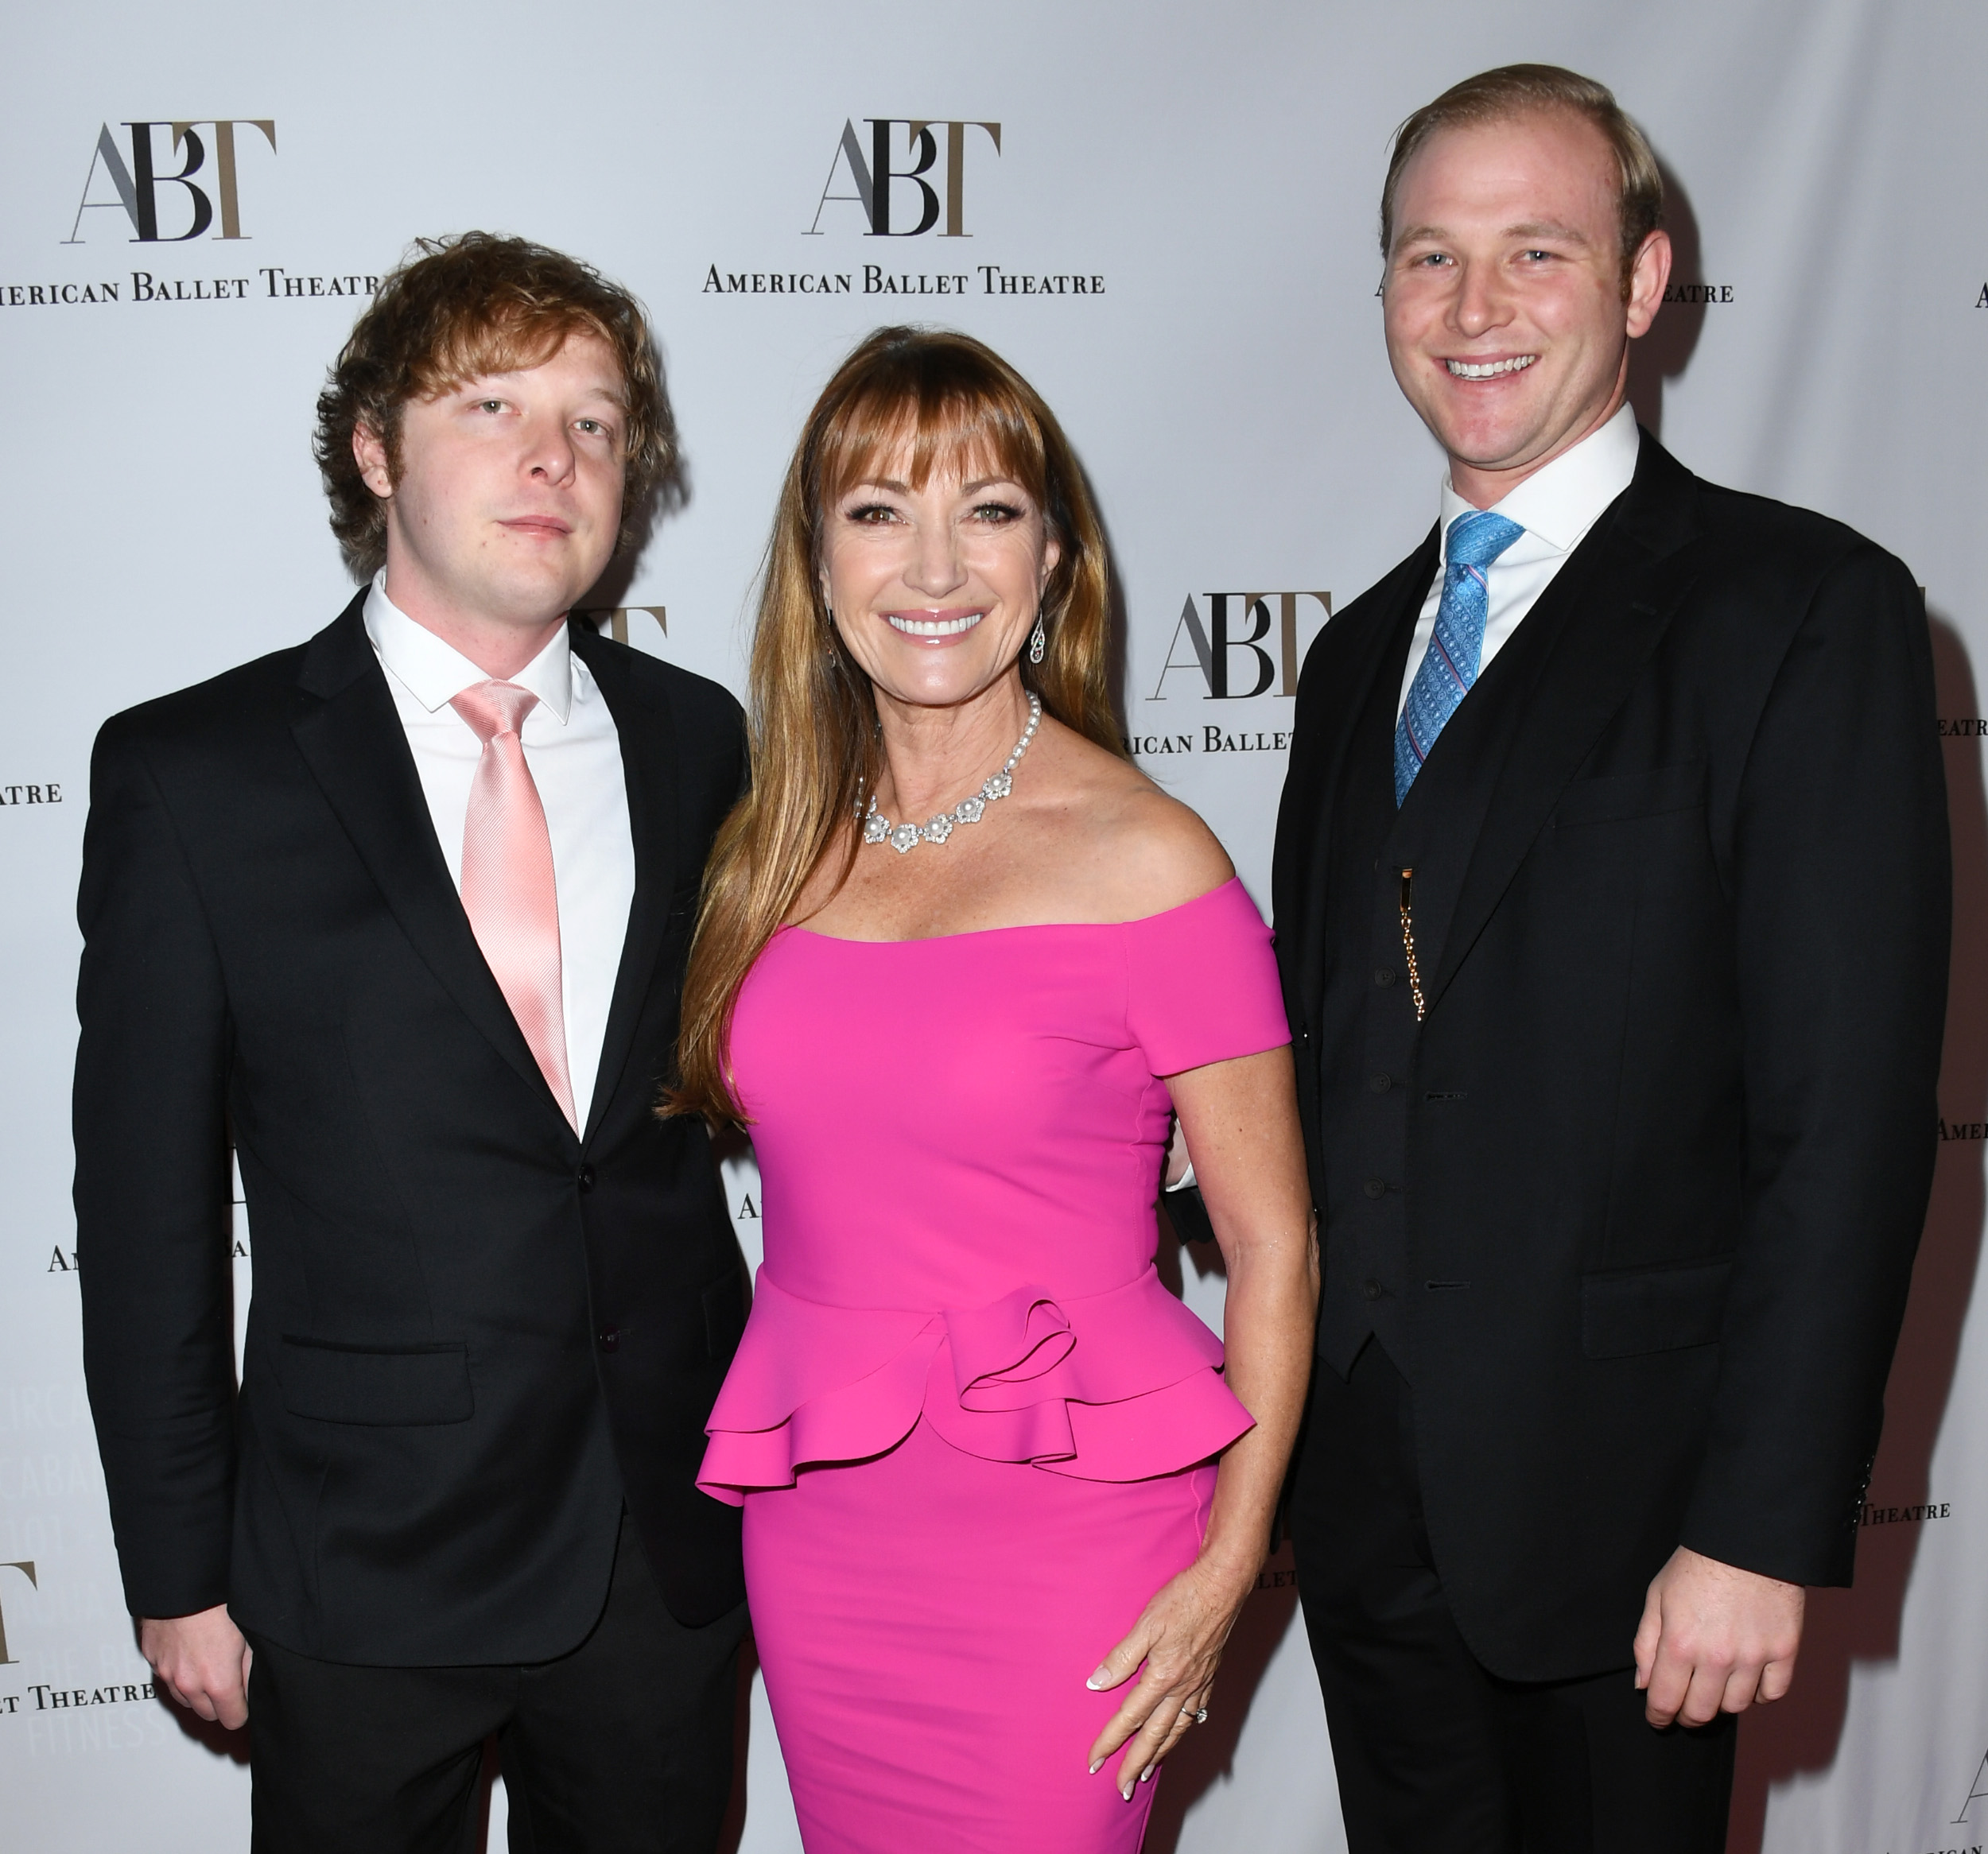 John Keach, Jane Seymour and Kristopher Keach at American Ballet Theatre's Annual Holiday Benefit at The Beverly Hilton Hotel on December 16, 2019 in Beverly Hills, California. | Source: Getty Images